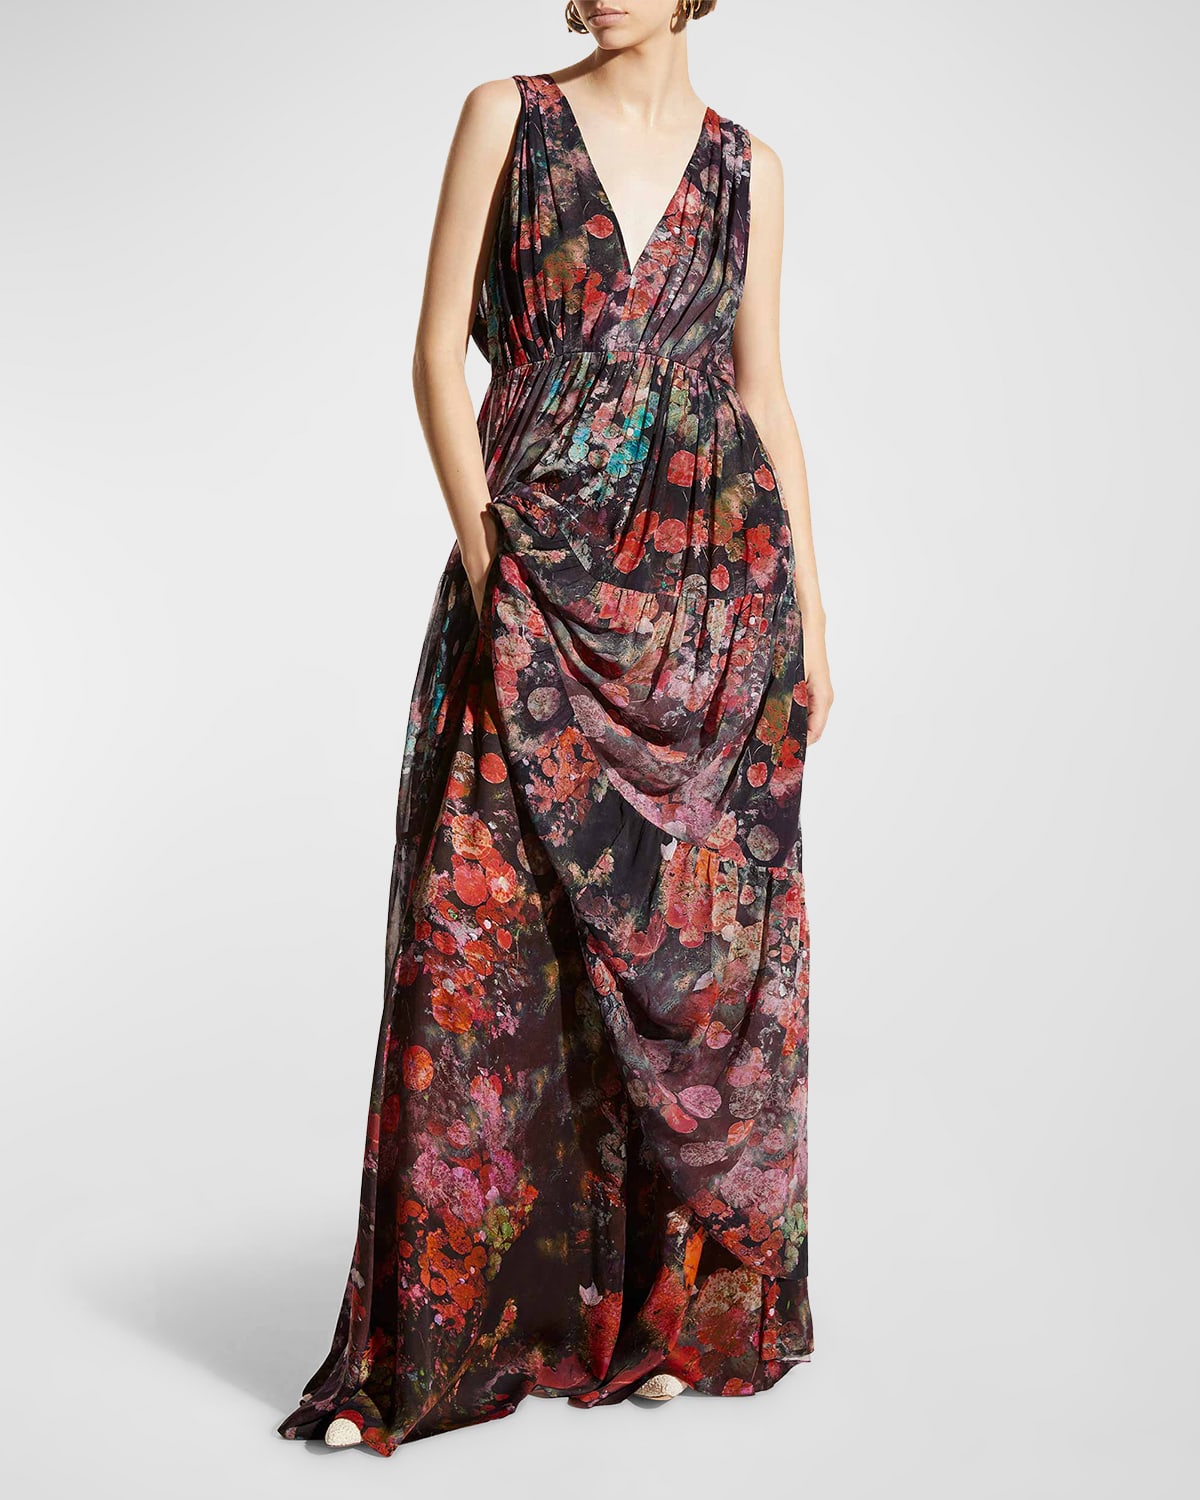 CARESTE Carlotta Tiered Floral-Print Gown